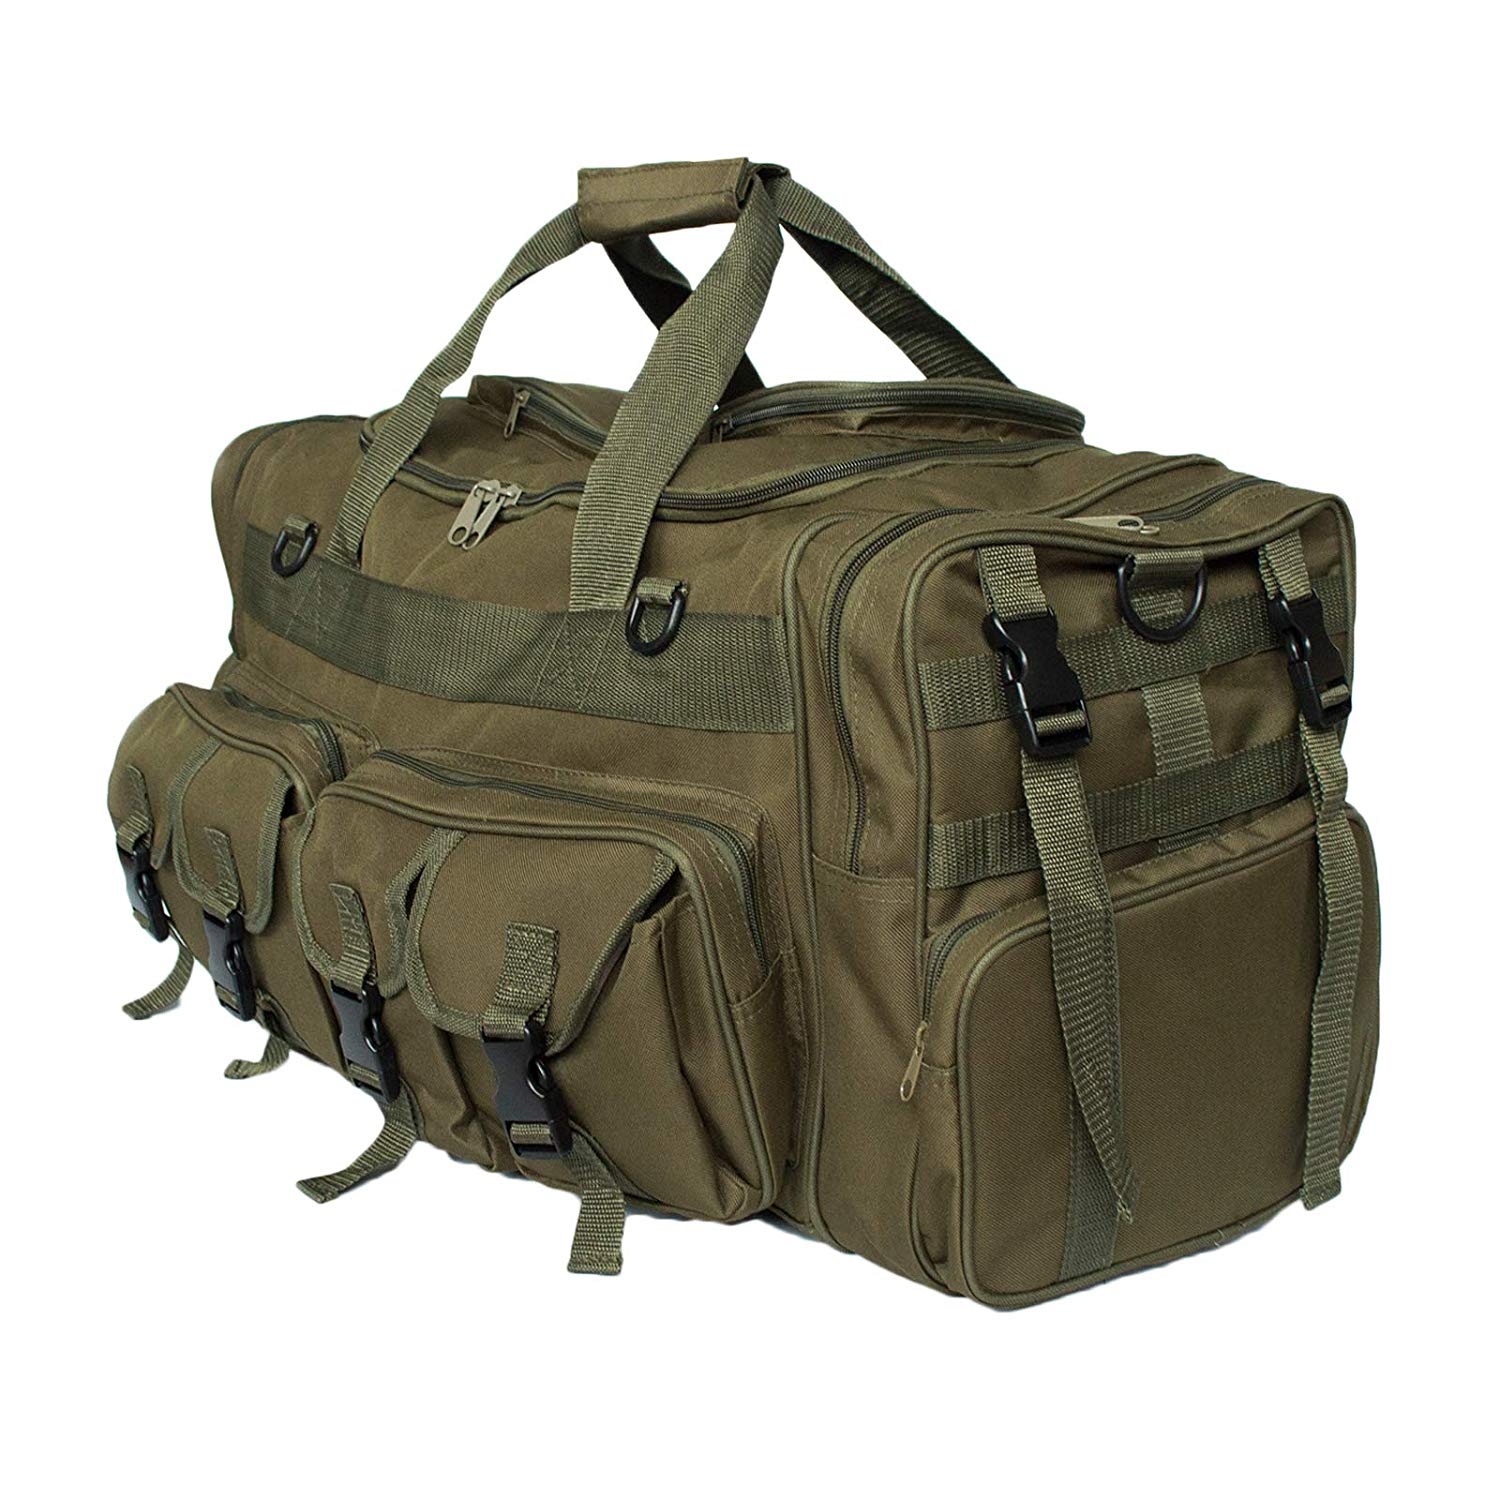 Outdoor Sports Travel Duffle Bag Large Men Military Tactical Single ...